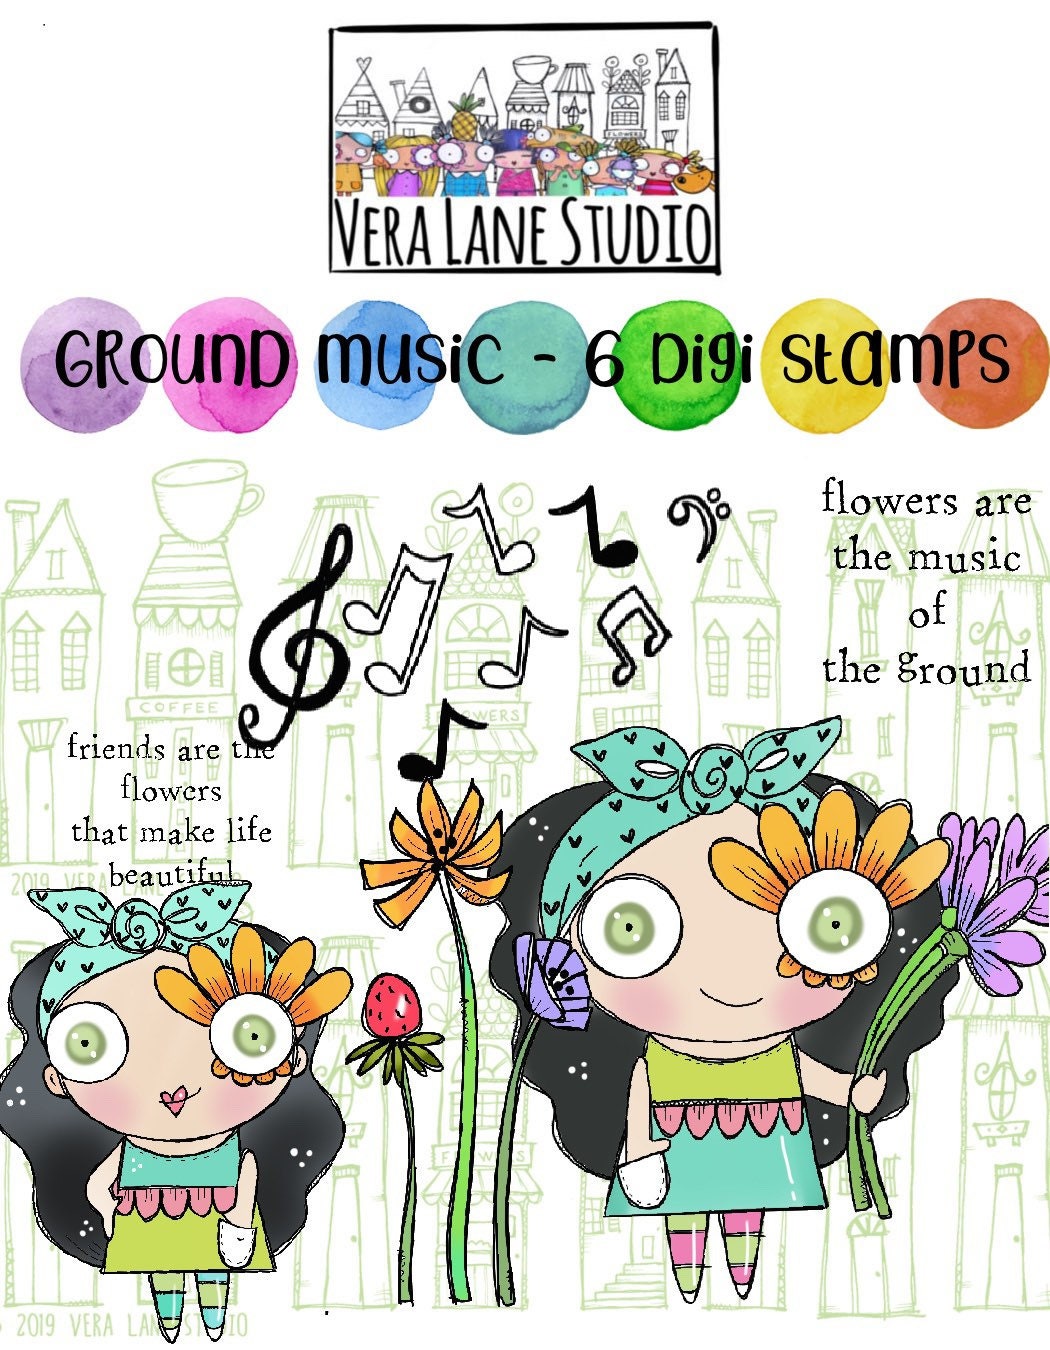 Ground Music - 6 digi stamps in jpg and png files